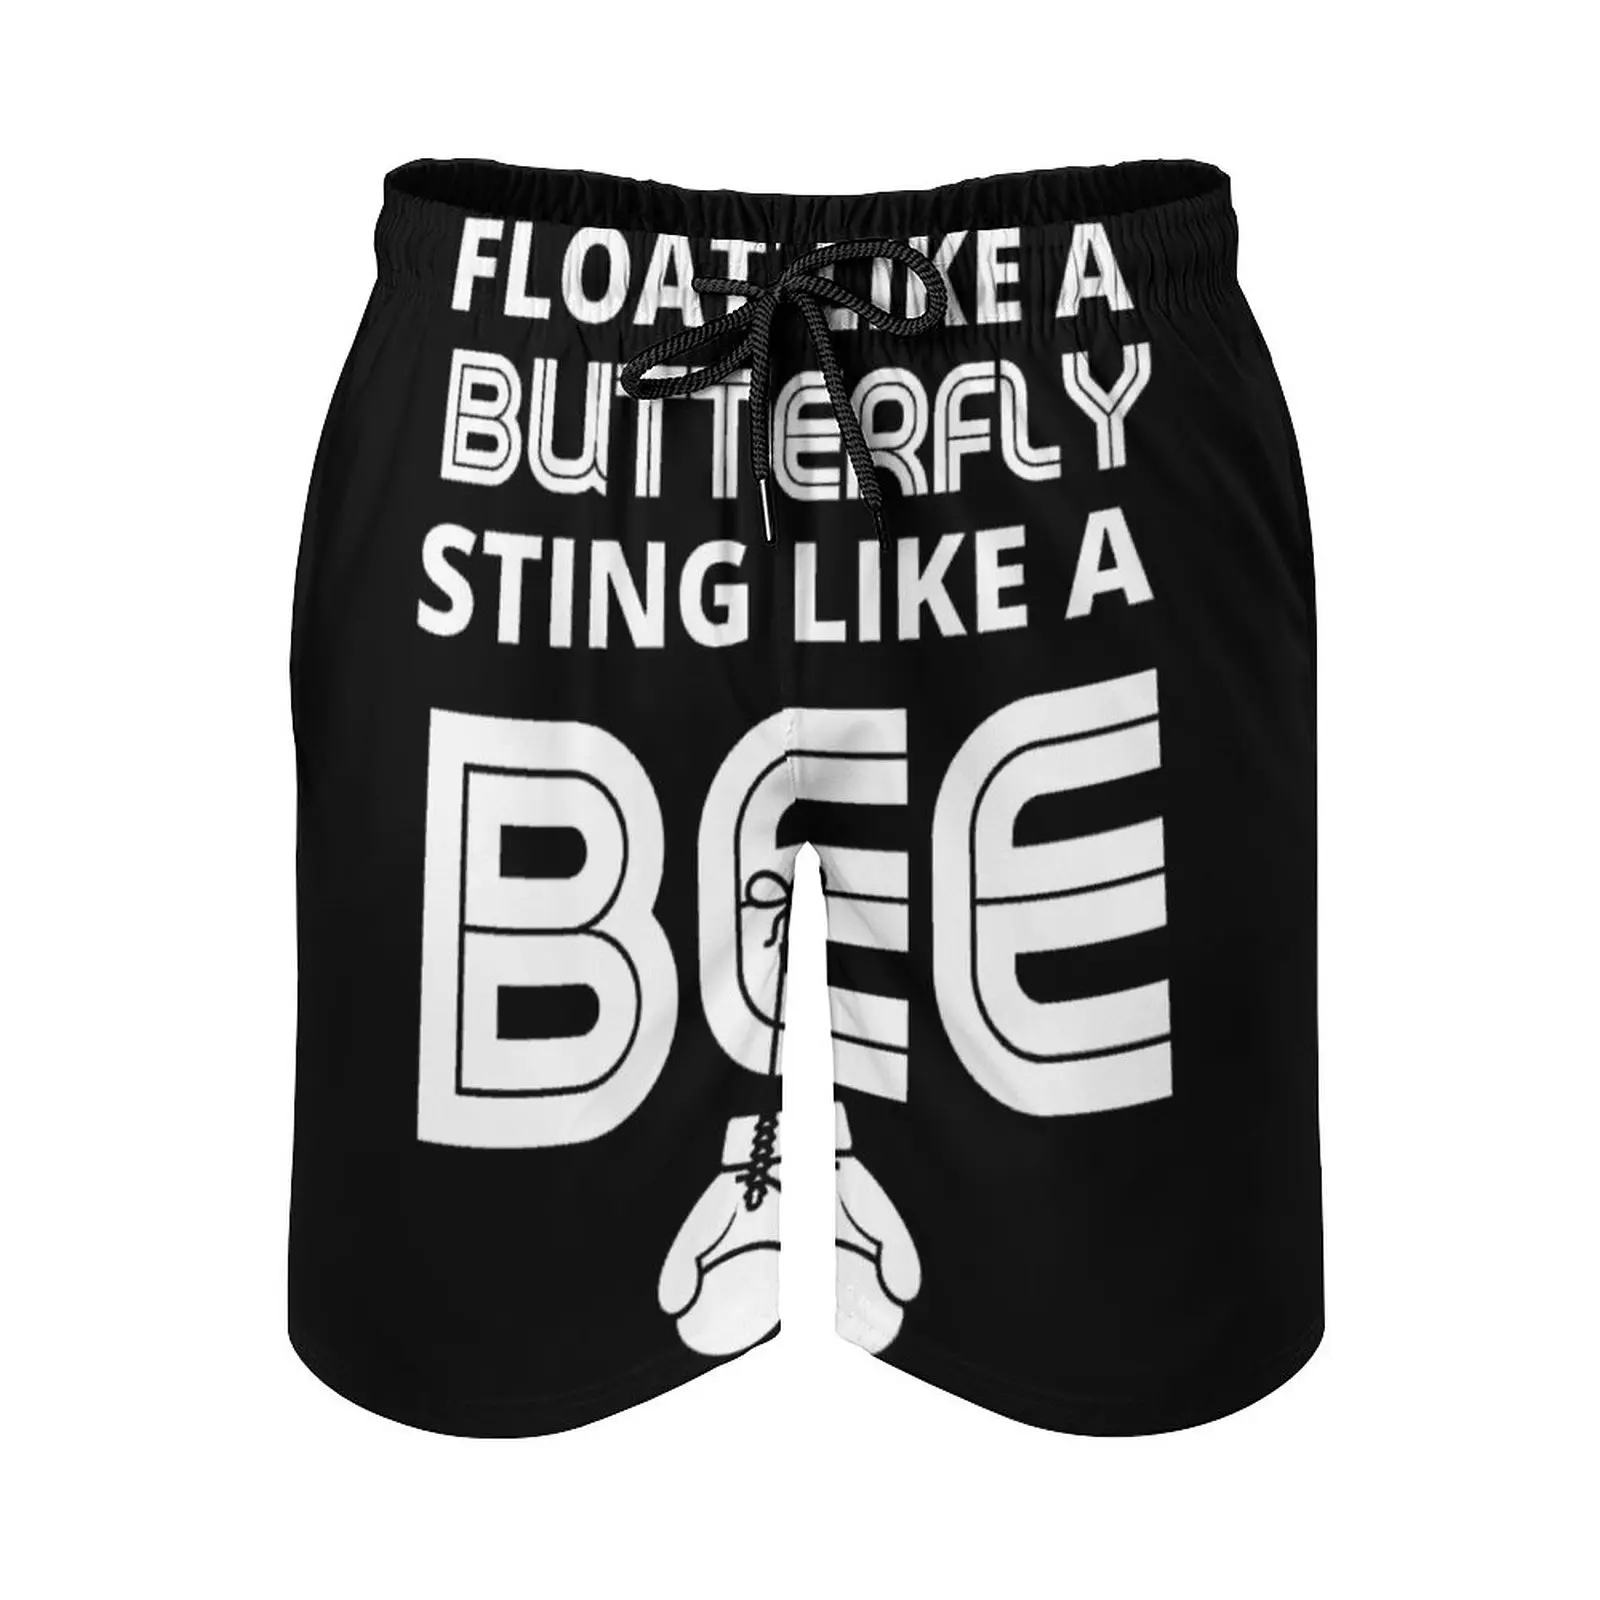 

Float Like A Butterfly Sting Like A Bee Muhammad Ali(1) Anime BeachVintage Adjustable Drawcord Breathable Quick Dry Men's Beach